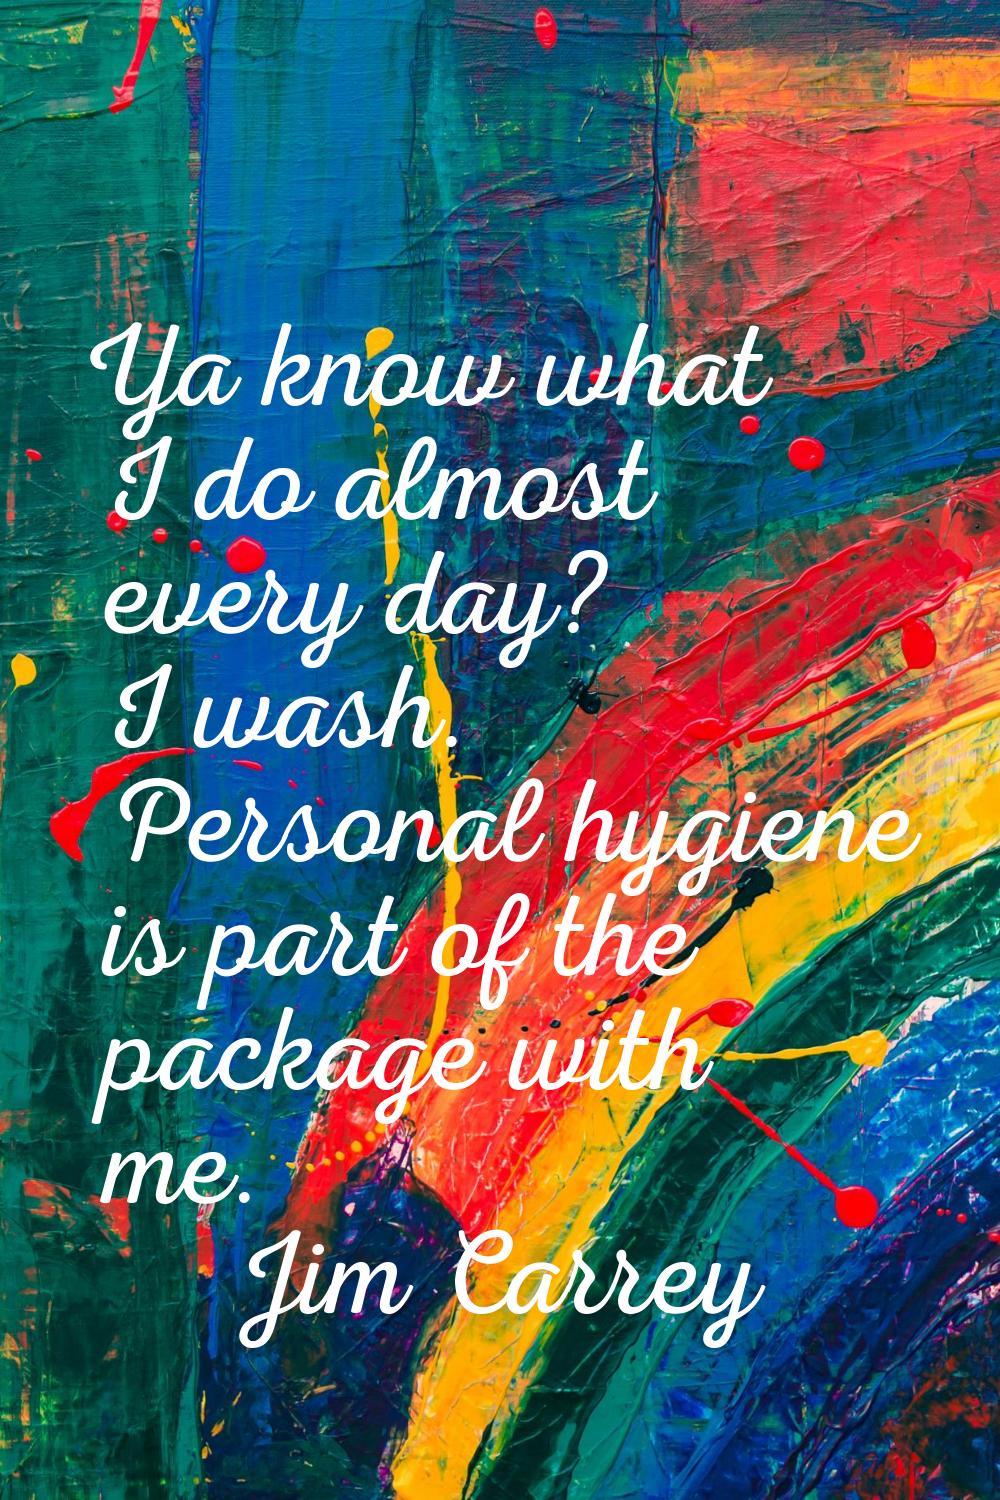 Ya know what I do almost every day? I wash. Personal hygiene is part of the package with me.